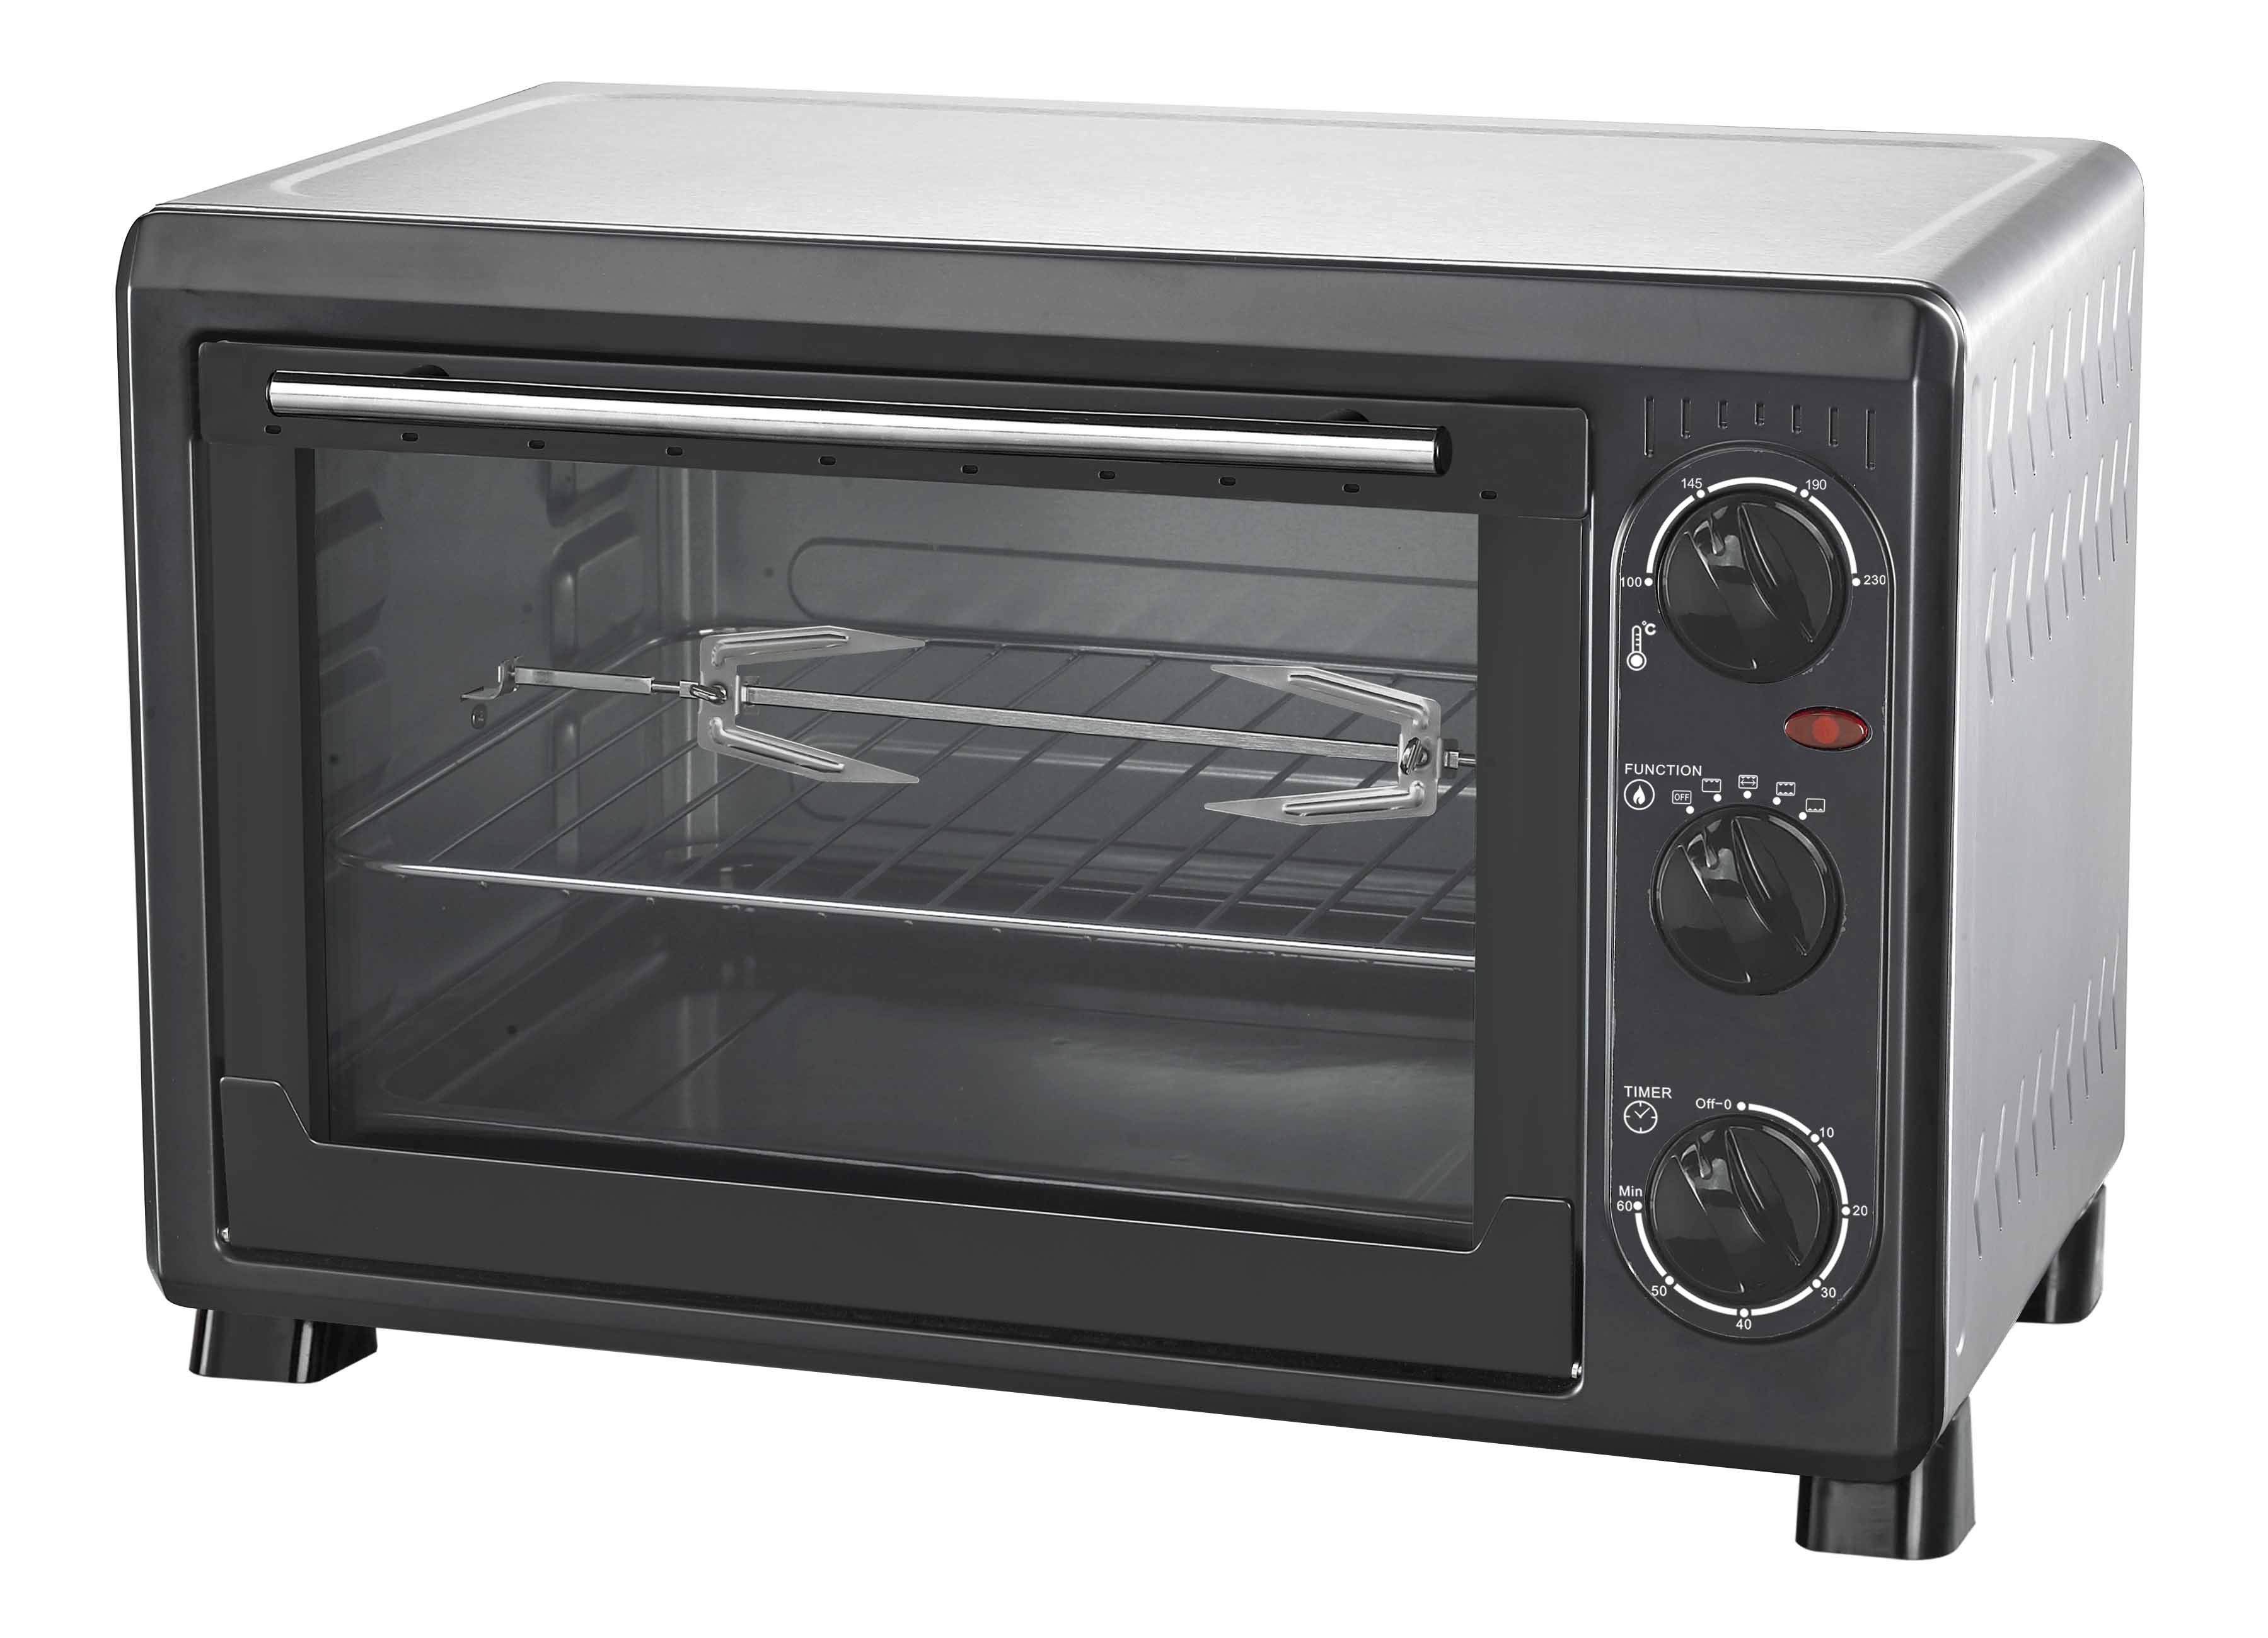 28L Electrical oven with Expand back